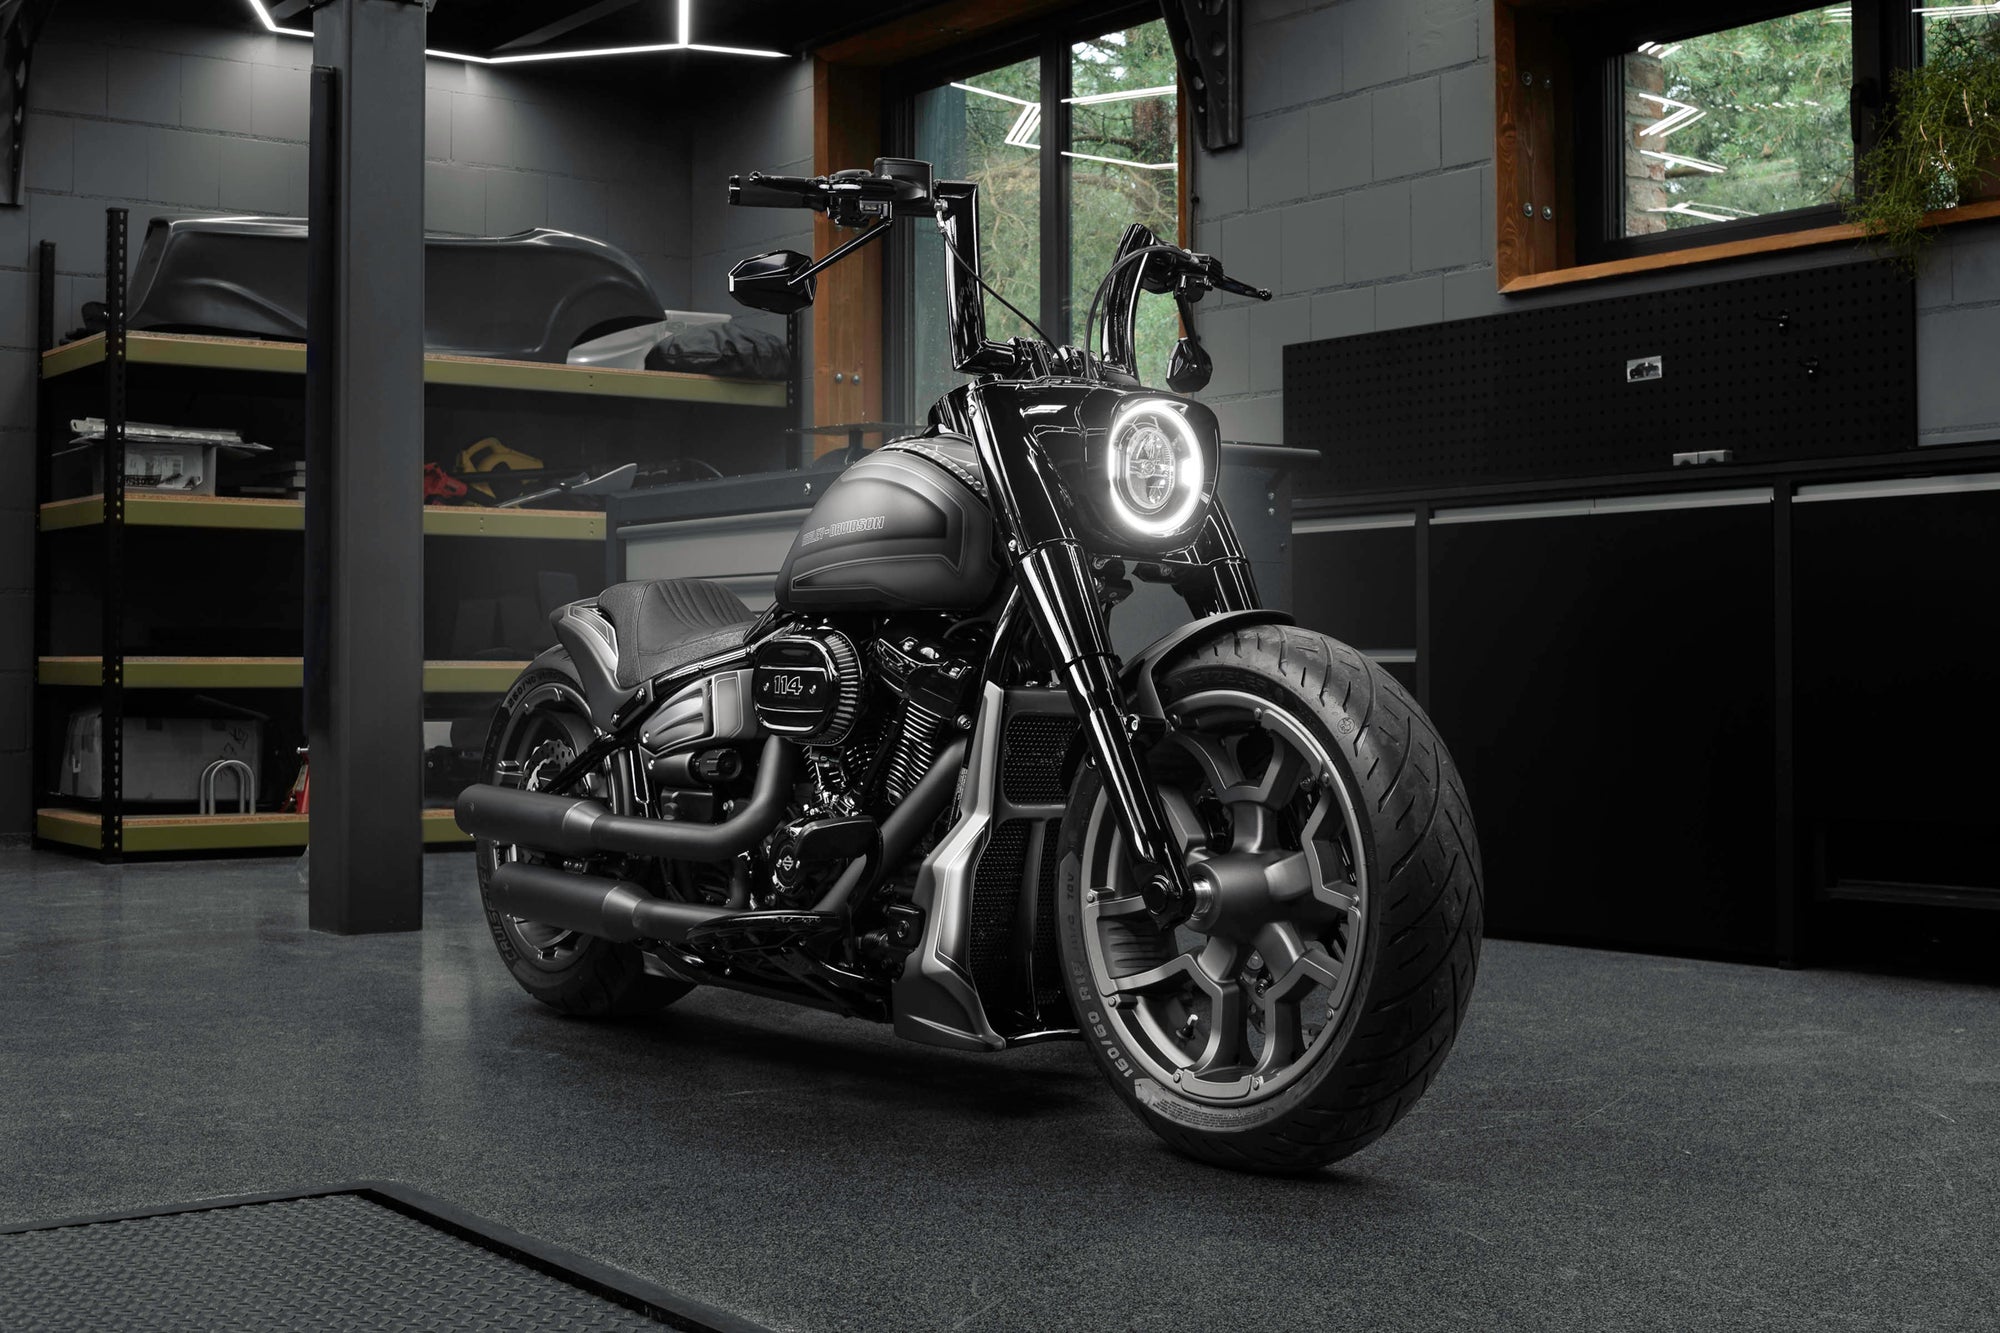 Harley Davidson Fat Boy motorcycle with Killer Custom parts from the front in a modern bike shop